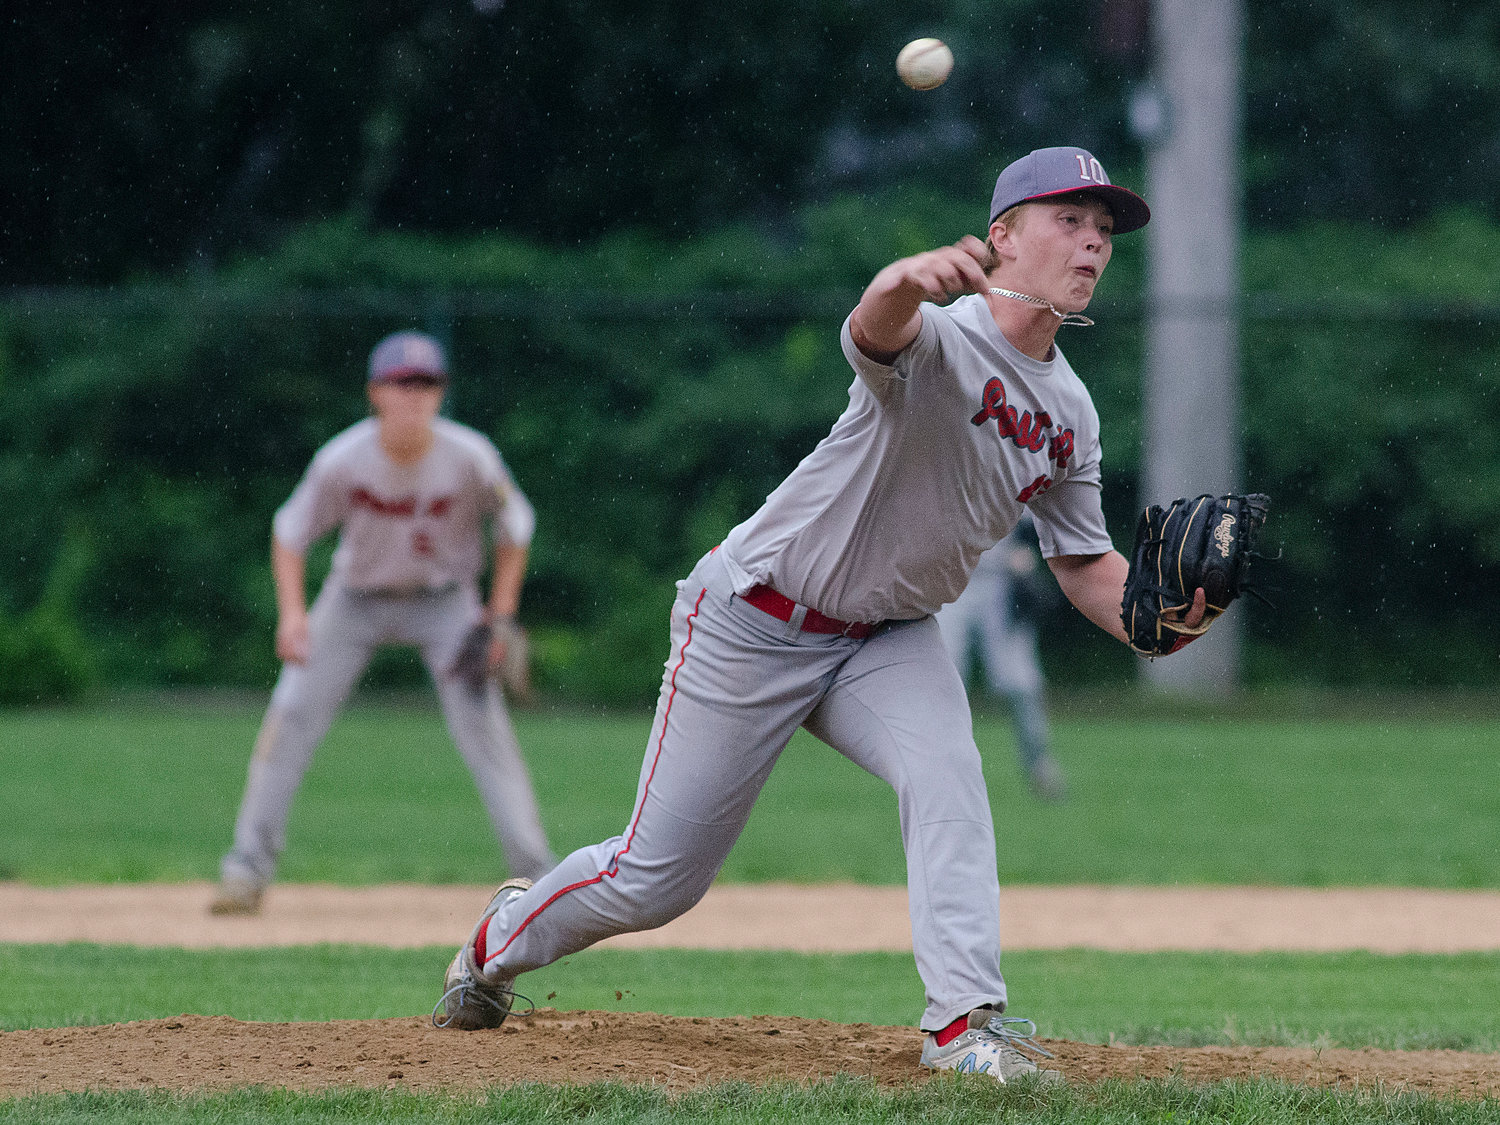 Aidan Greene throws a pitch for the Riverside Post 10 Junior Legion baseball team during its game against Scituate on Thursday night, July 29.